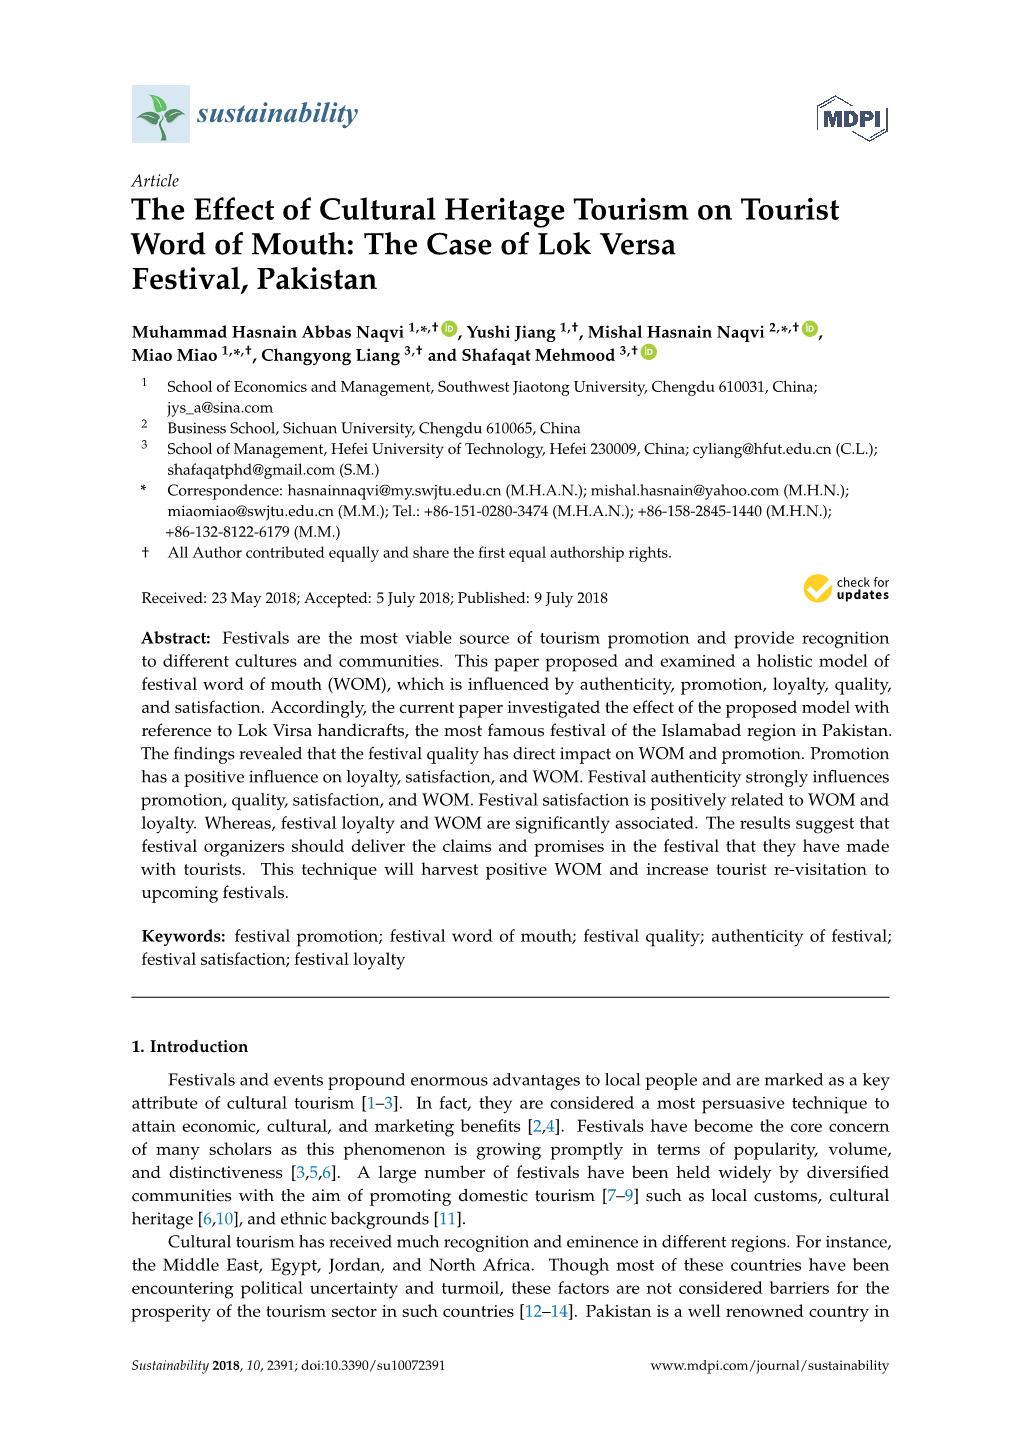 The Effect of Cultural Heritage Tourism on Tourist Word of Mouth: the Case of Lok Versa Festival, Pakistan